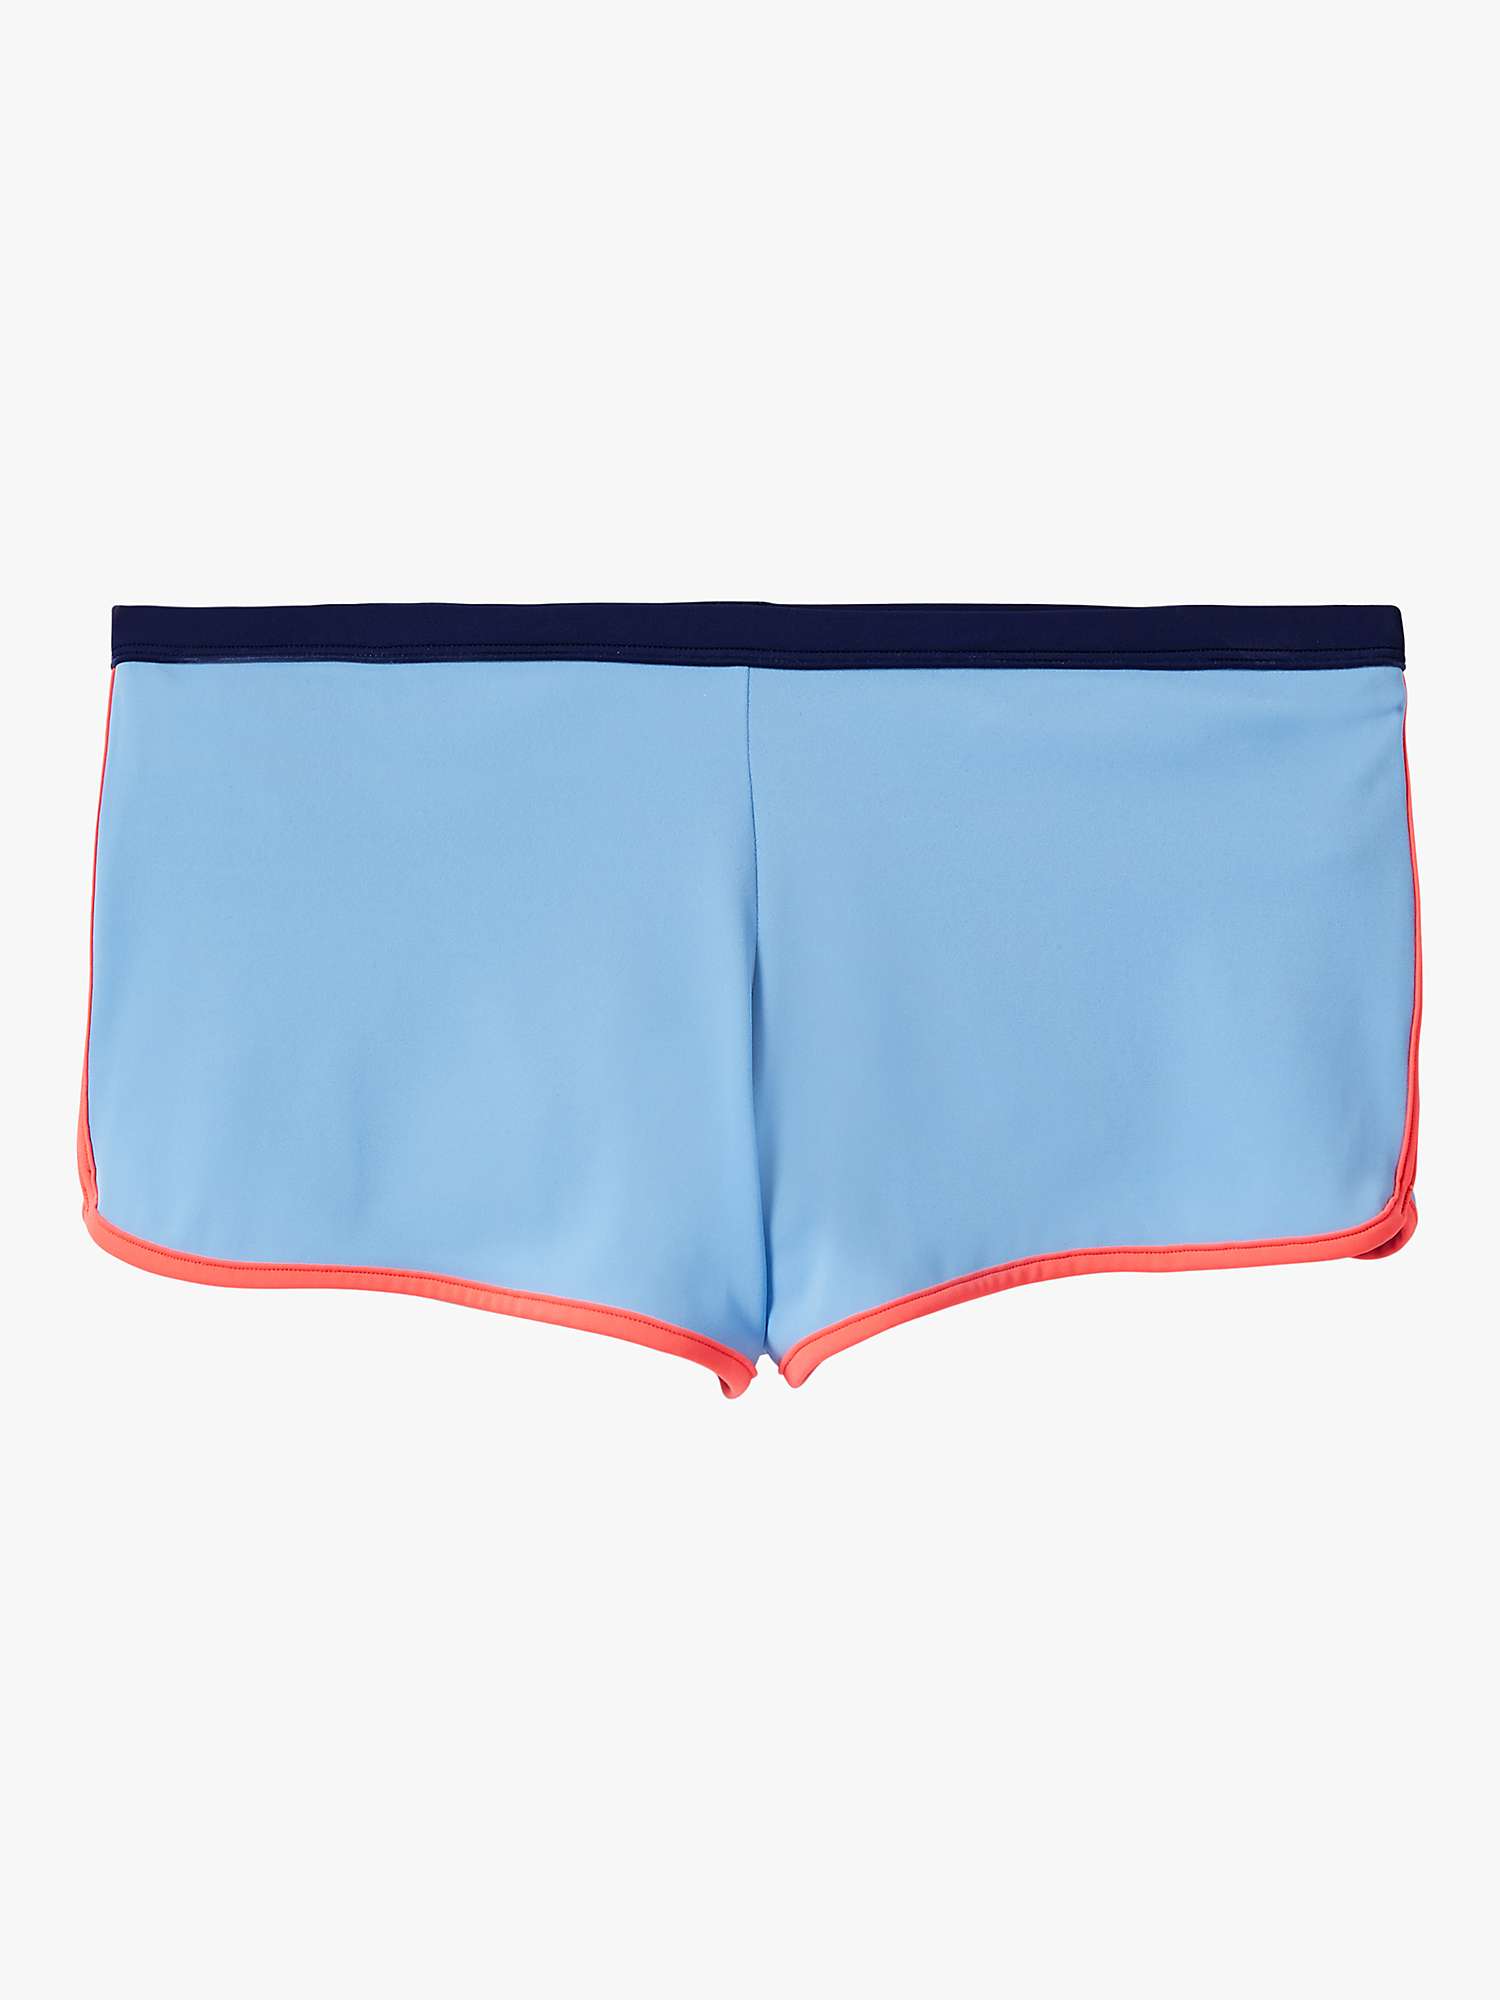 Buy Boden Piping Swim Shorts Online at johnlewis.com